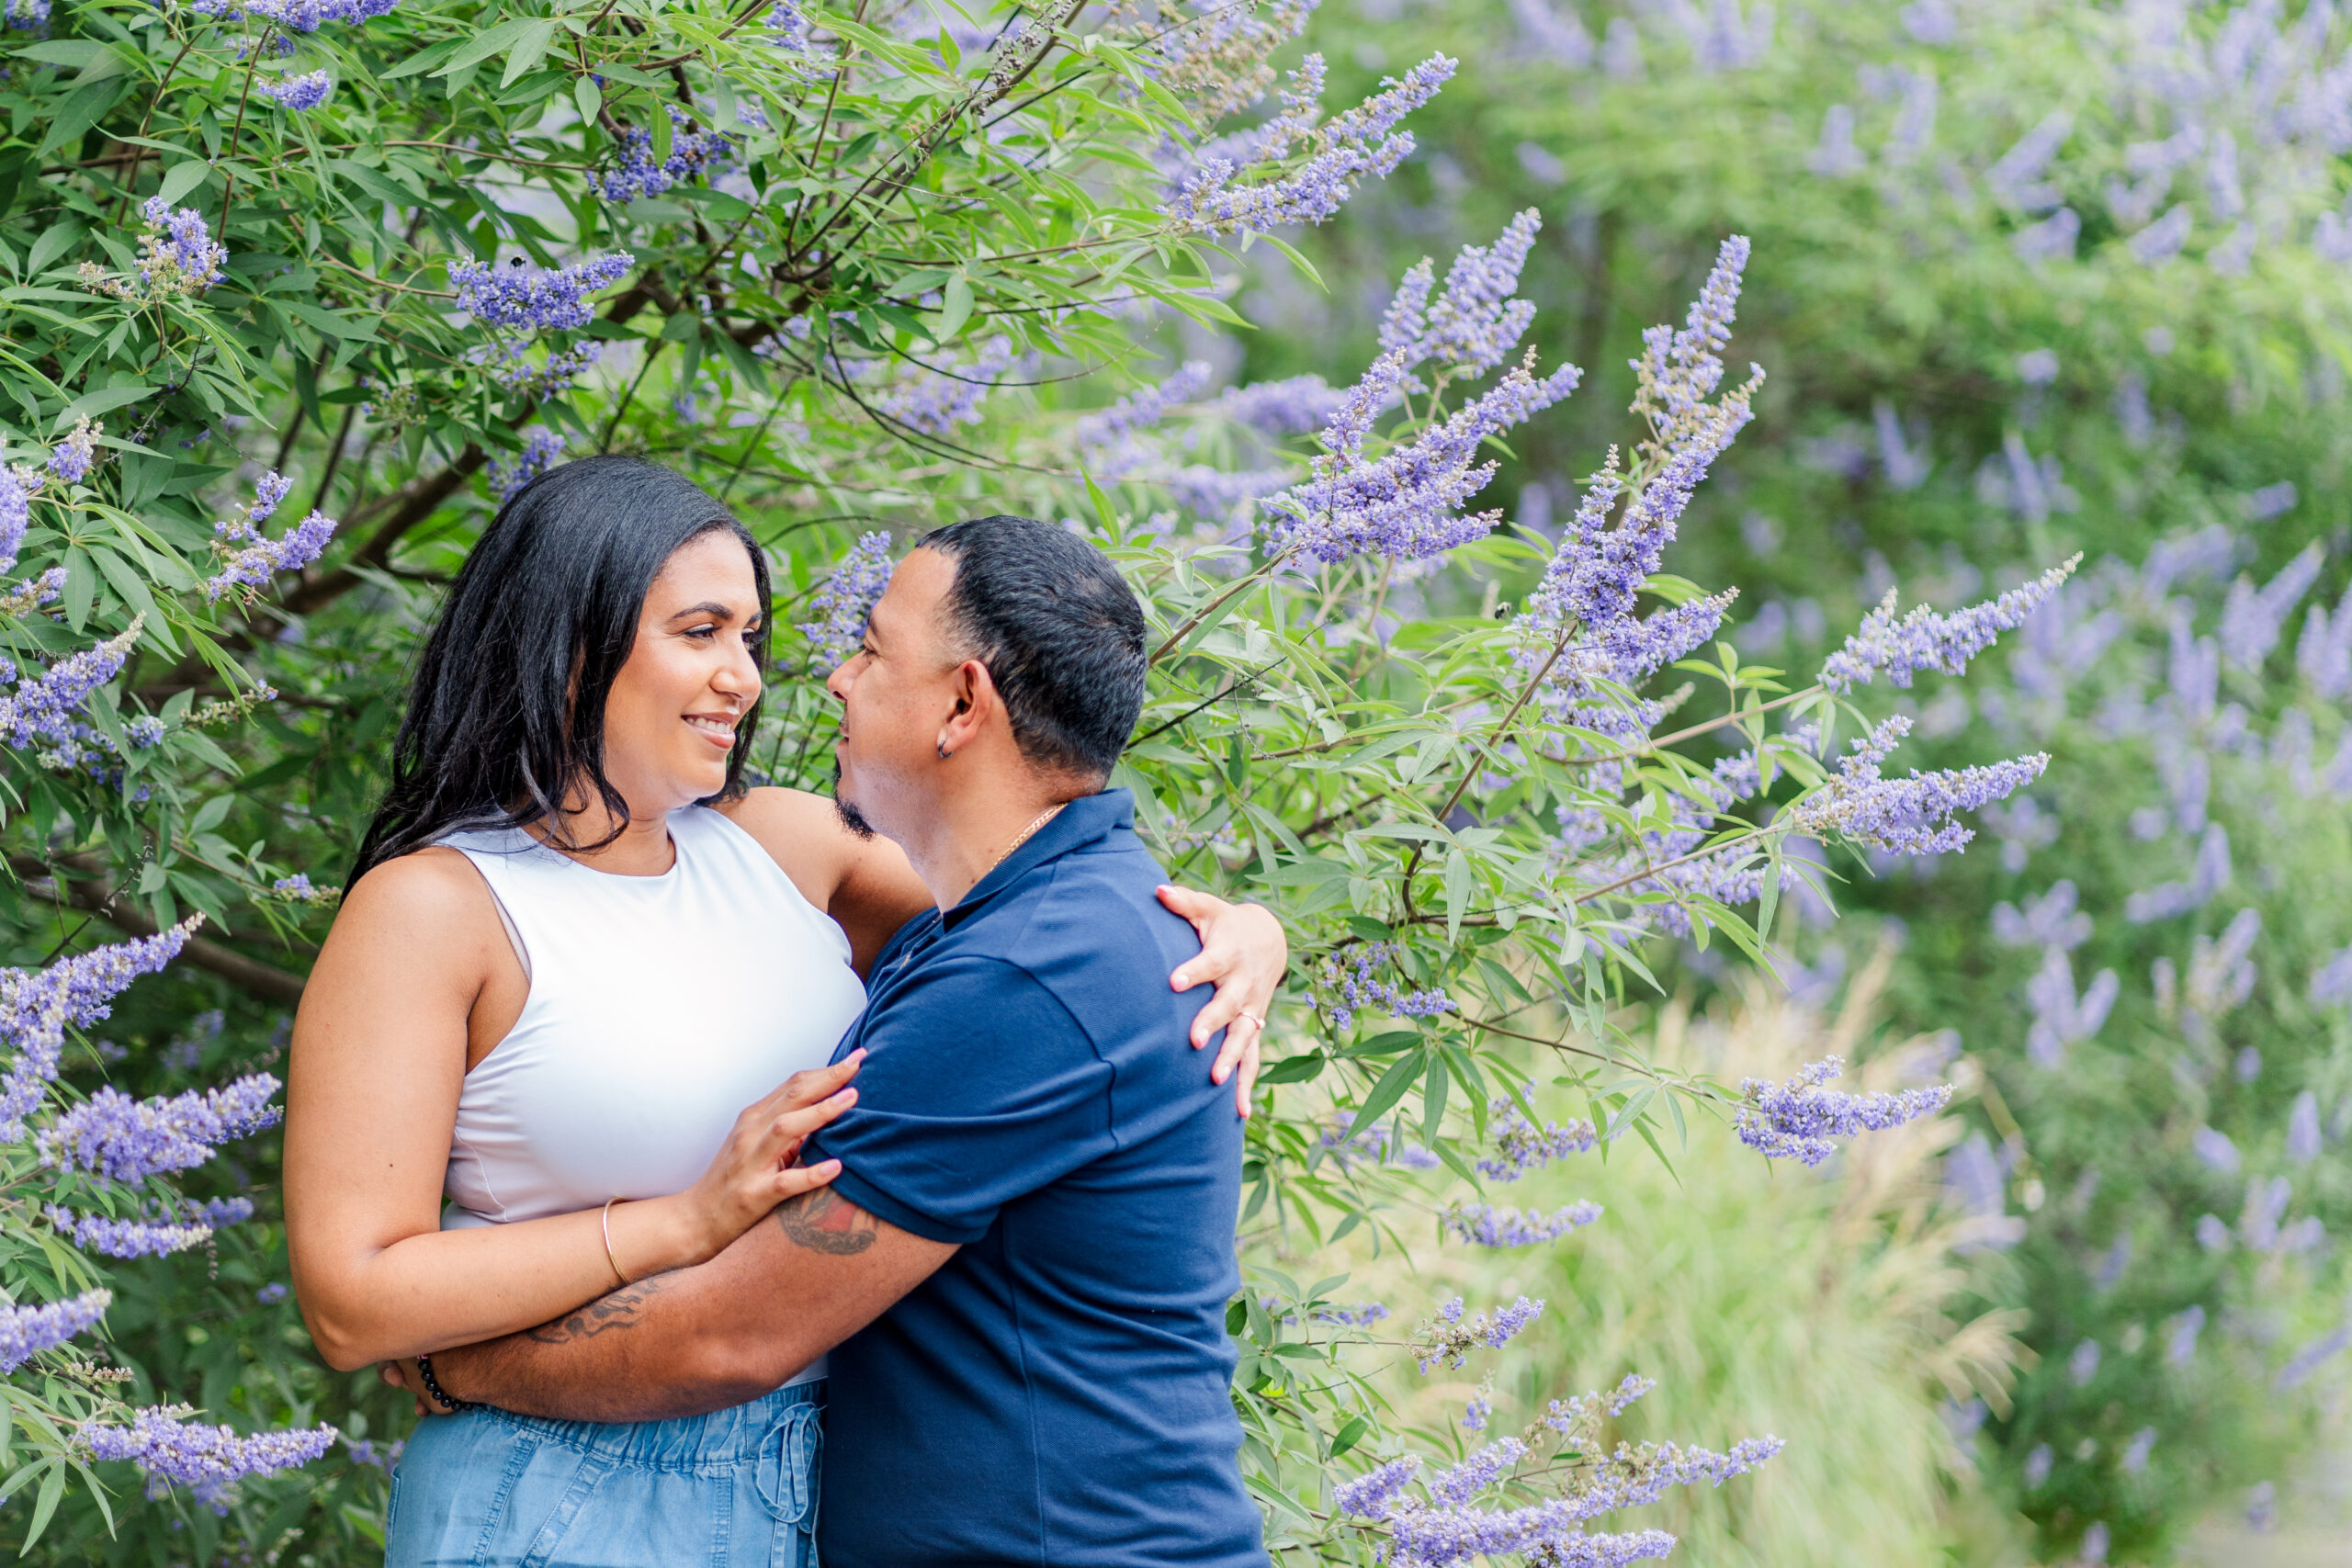 Zaida and Julio snuggle in close and look into each other's eyes. Both are nestled in a bush that contains a sea of purple flowers.